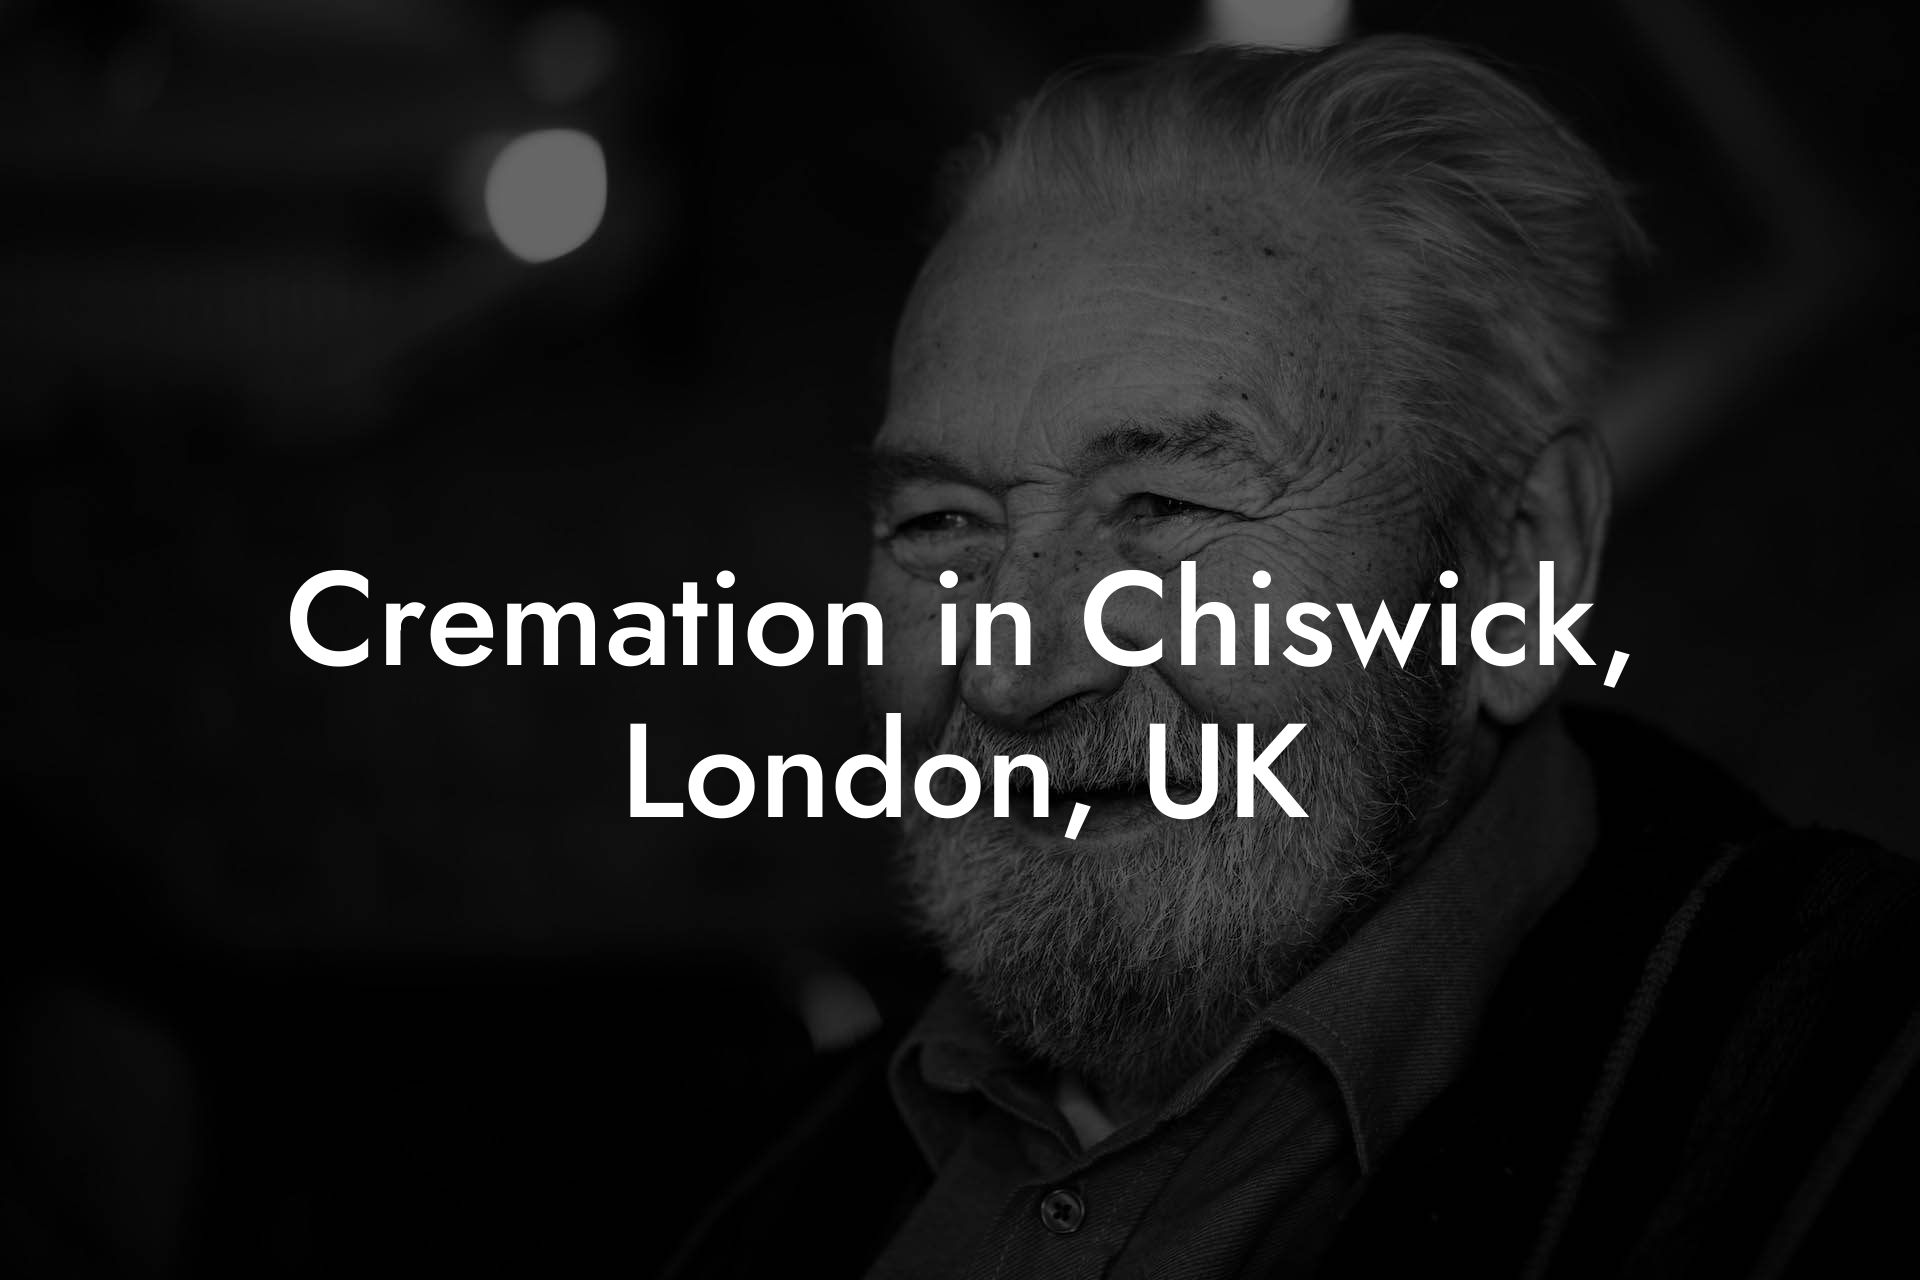 Cremation in Chiswick, London, UK